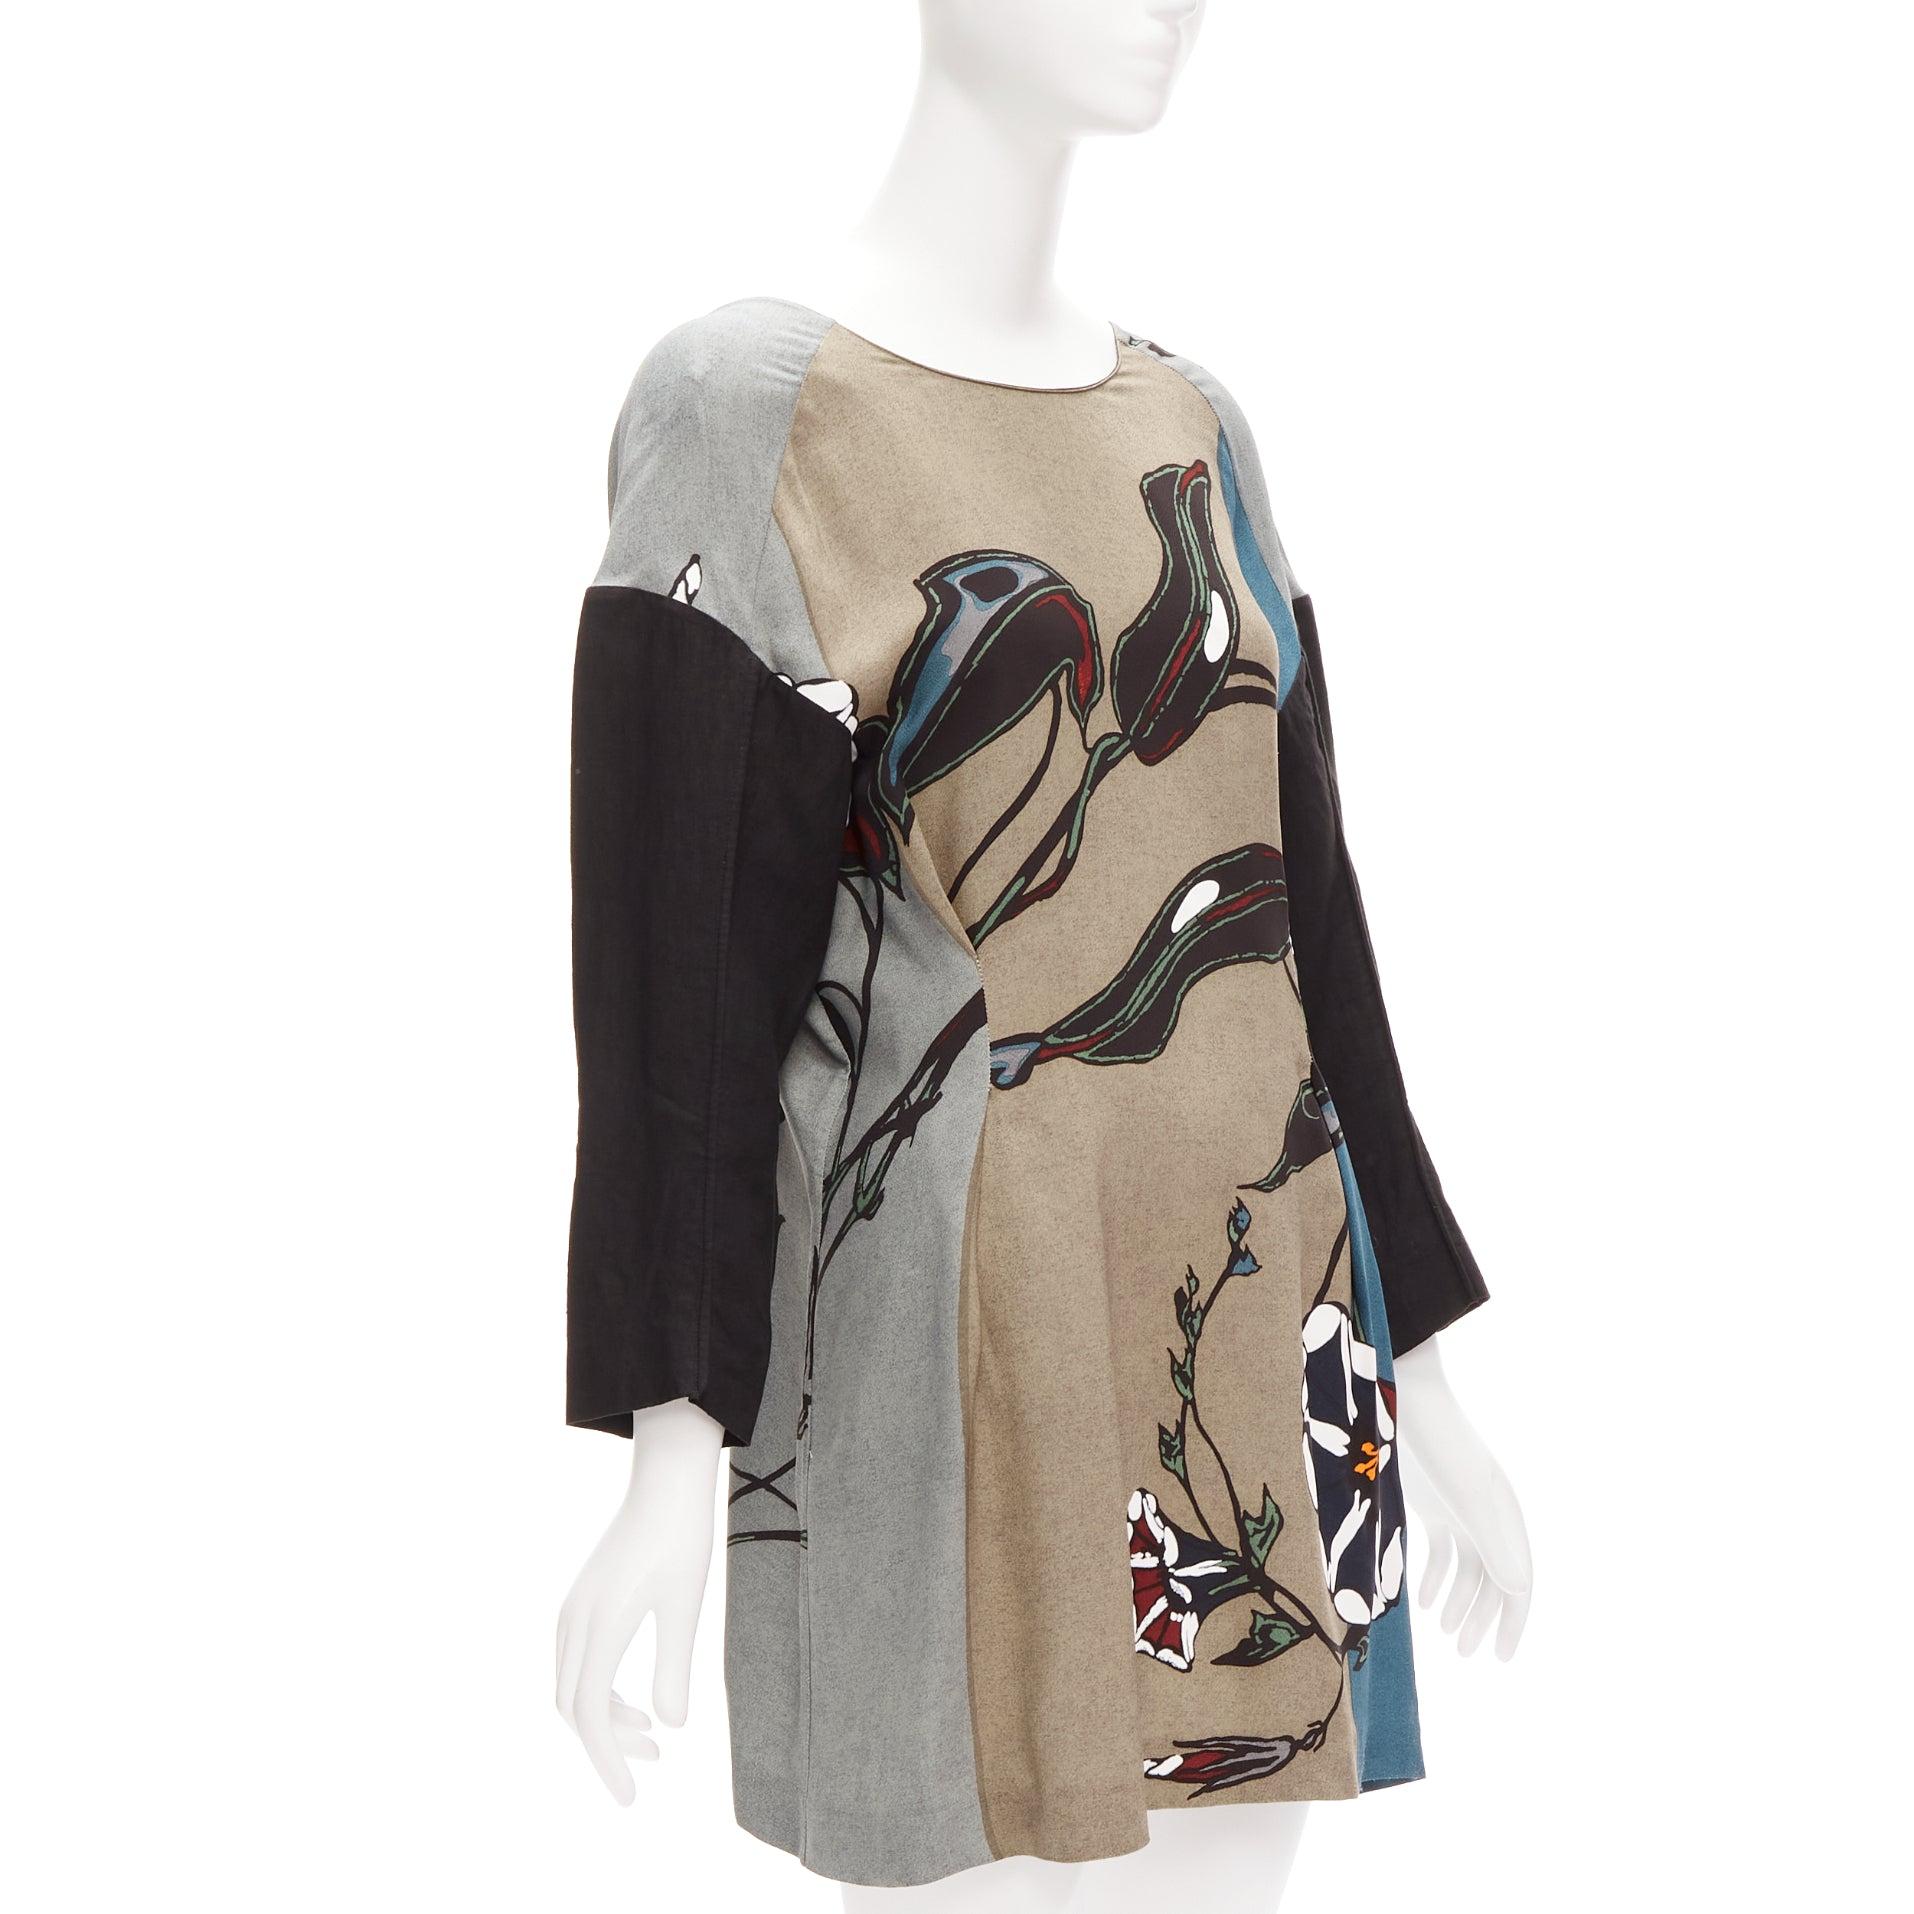 MARNI multicolour beige floral print back contrast dropped sleeve dress IT38 XS
Reference: CELG/A00294
Brand: Marni
Material: Viscose, Blend
Color: Multicolour
Pattern: Floral
Closure: Slip On
Extra Details: 3D dropped sleeves.
Made in: